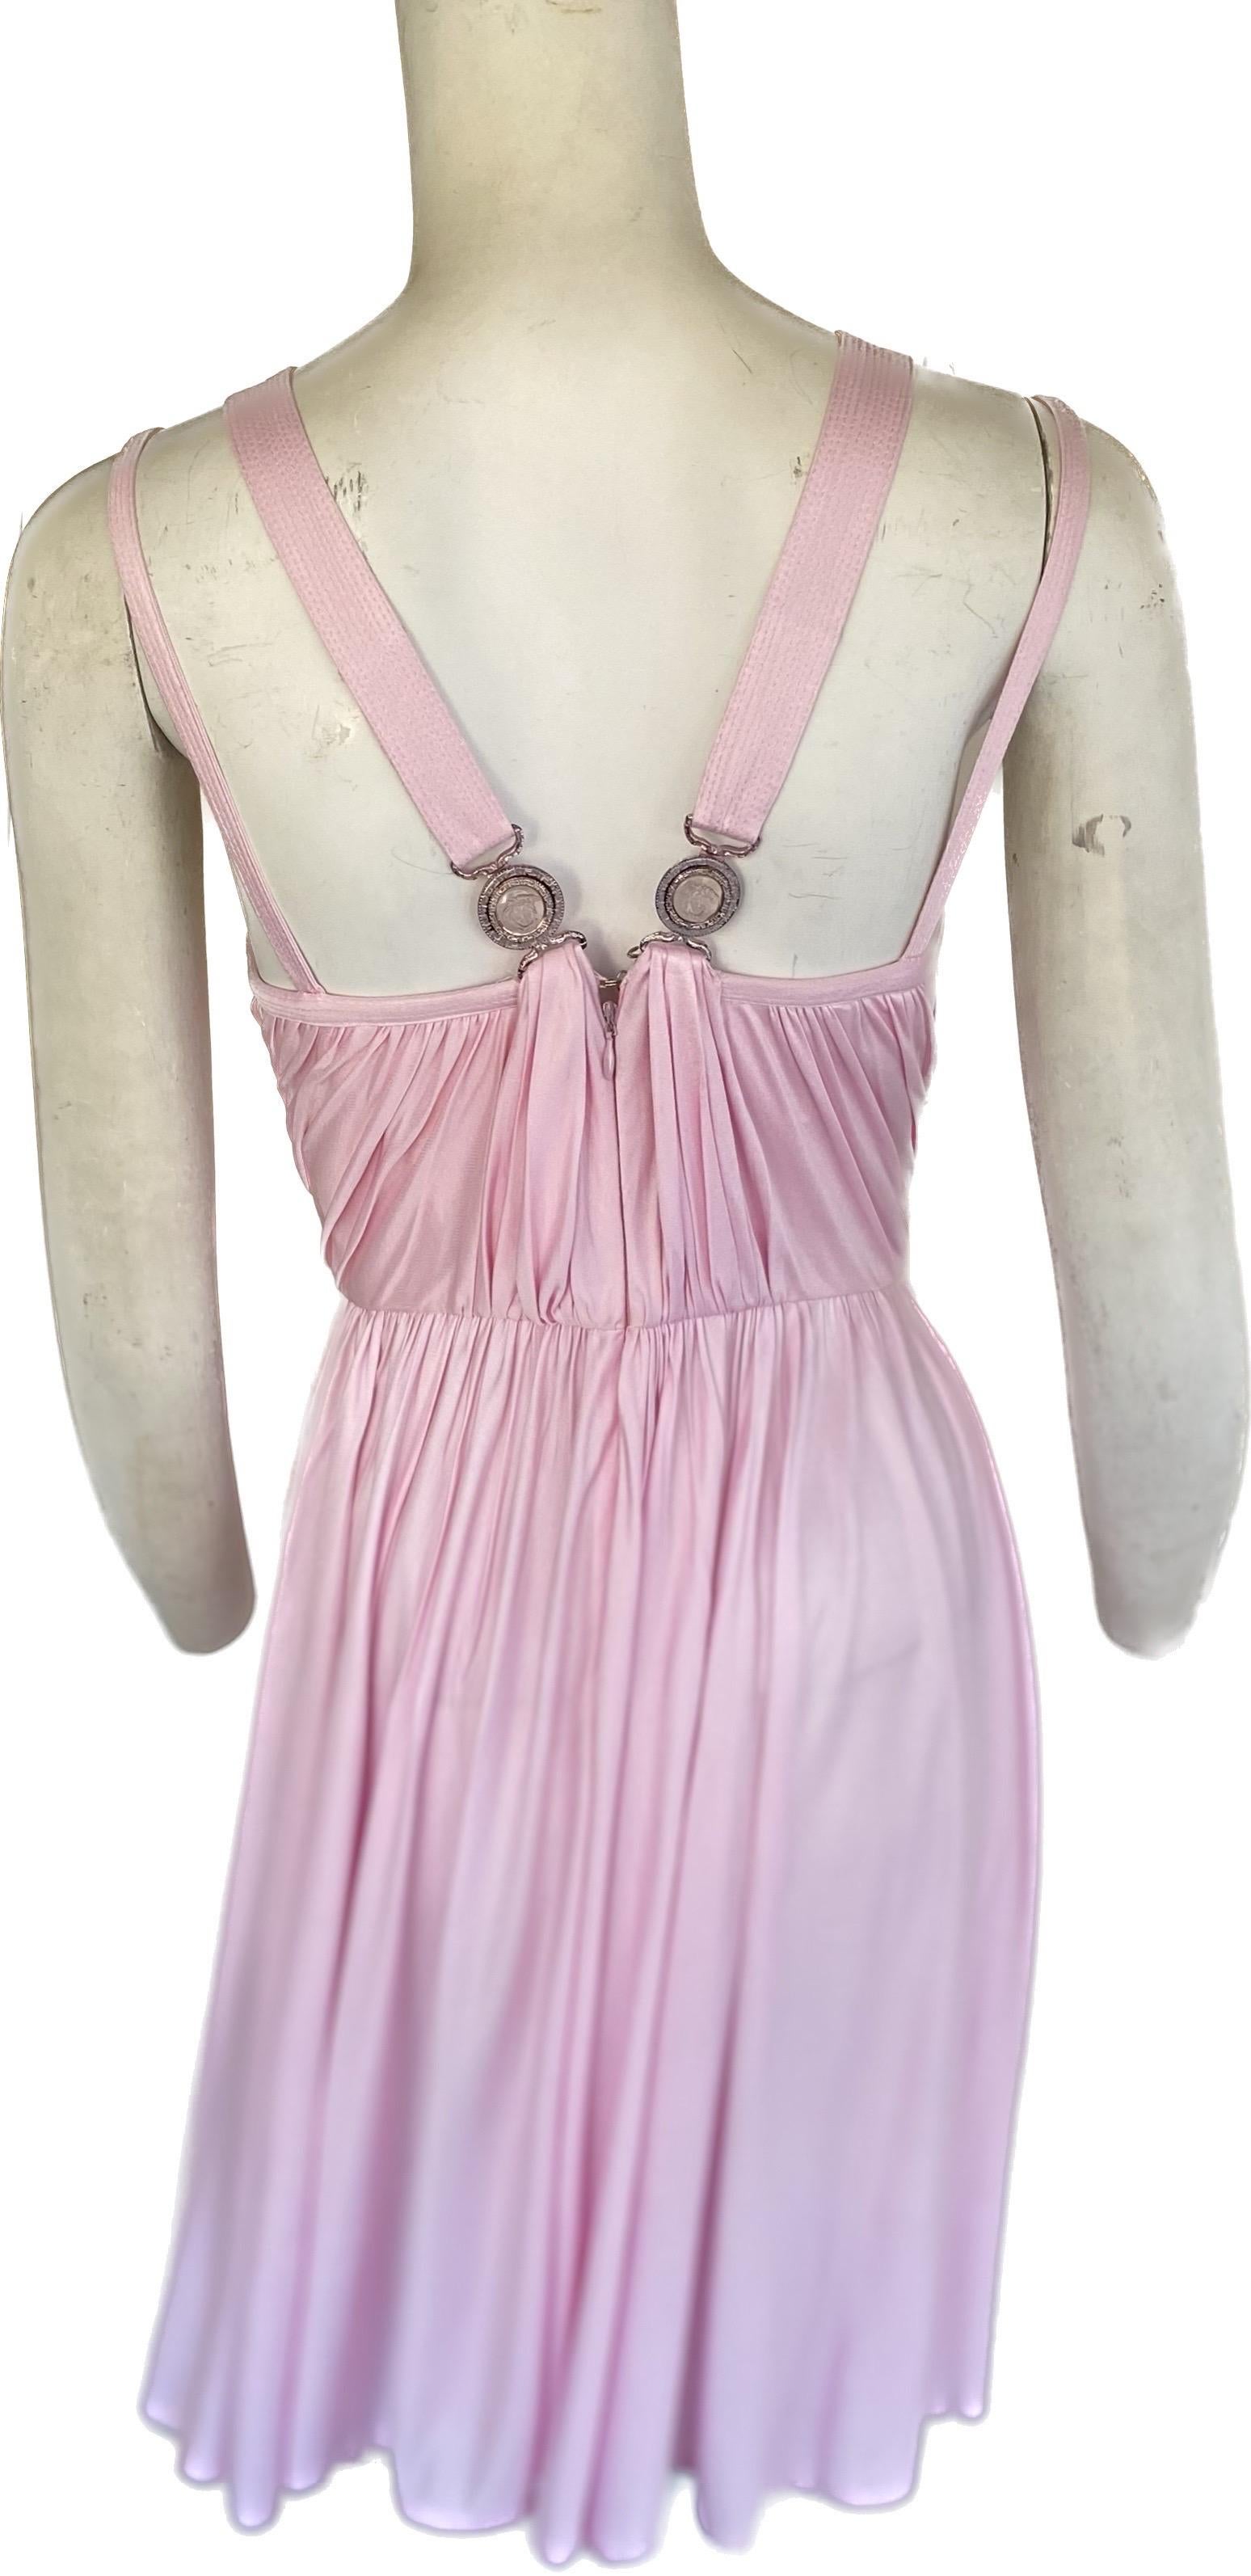 Women's Vintage Gianni Versace Couture 1995 Lilac Jersey Runway Dress w/ Medusa Closures